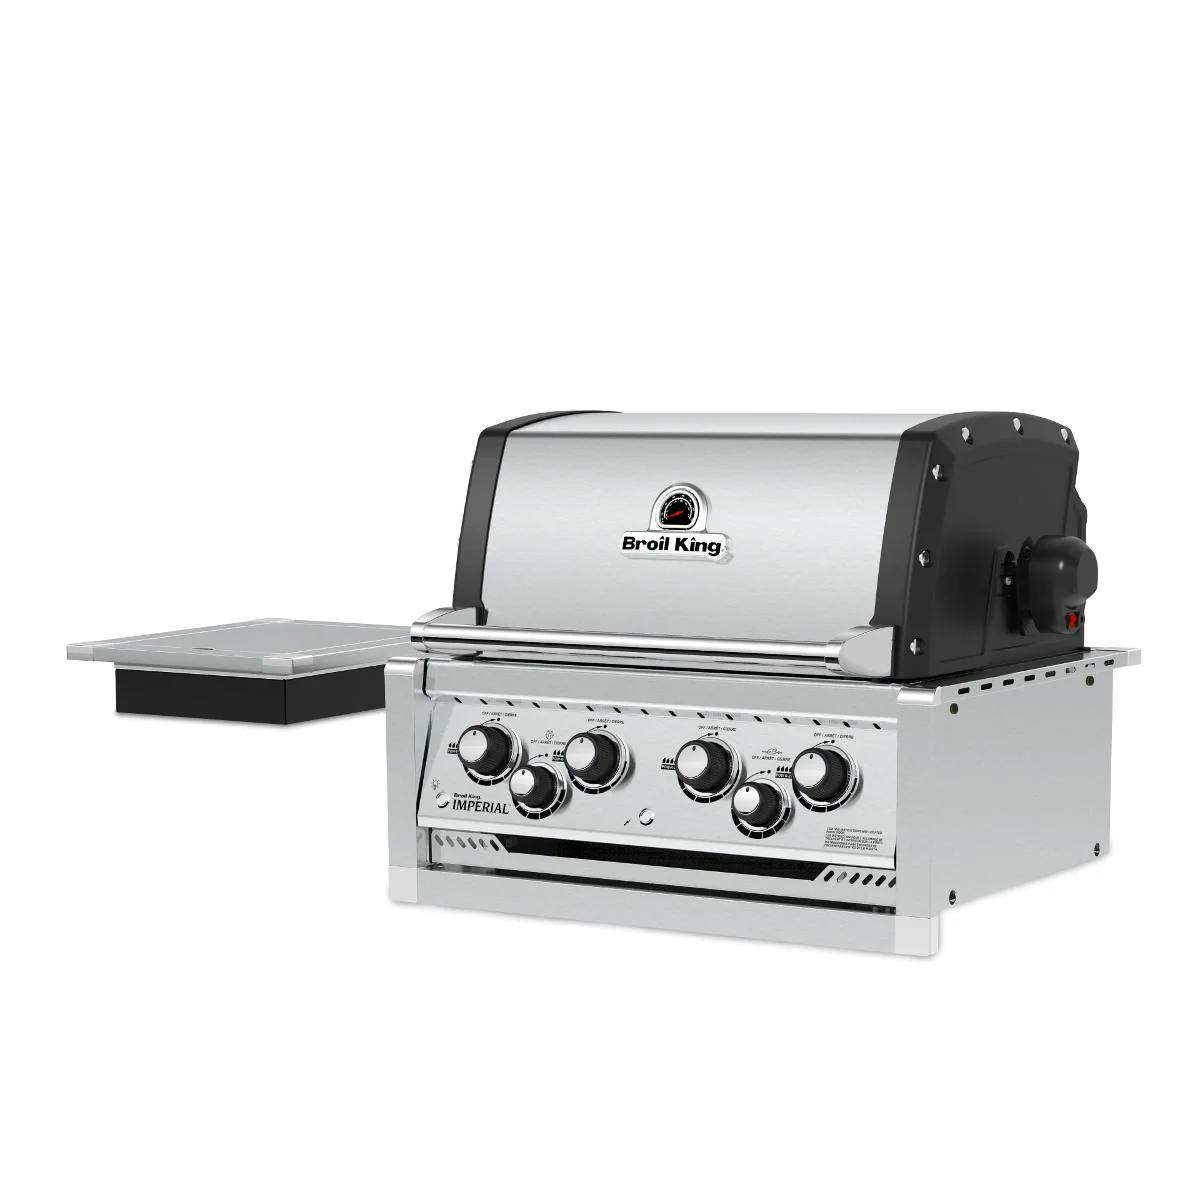 Broil King Imperial 490 Built-in Gas Grill with Rotisserie & Side Burner · Natural Gas